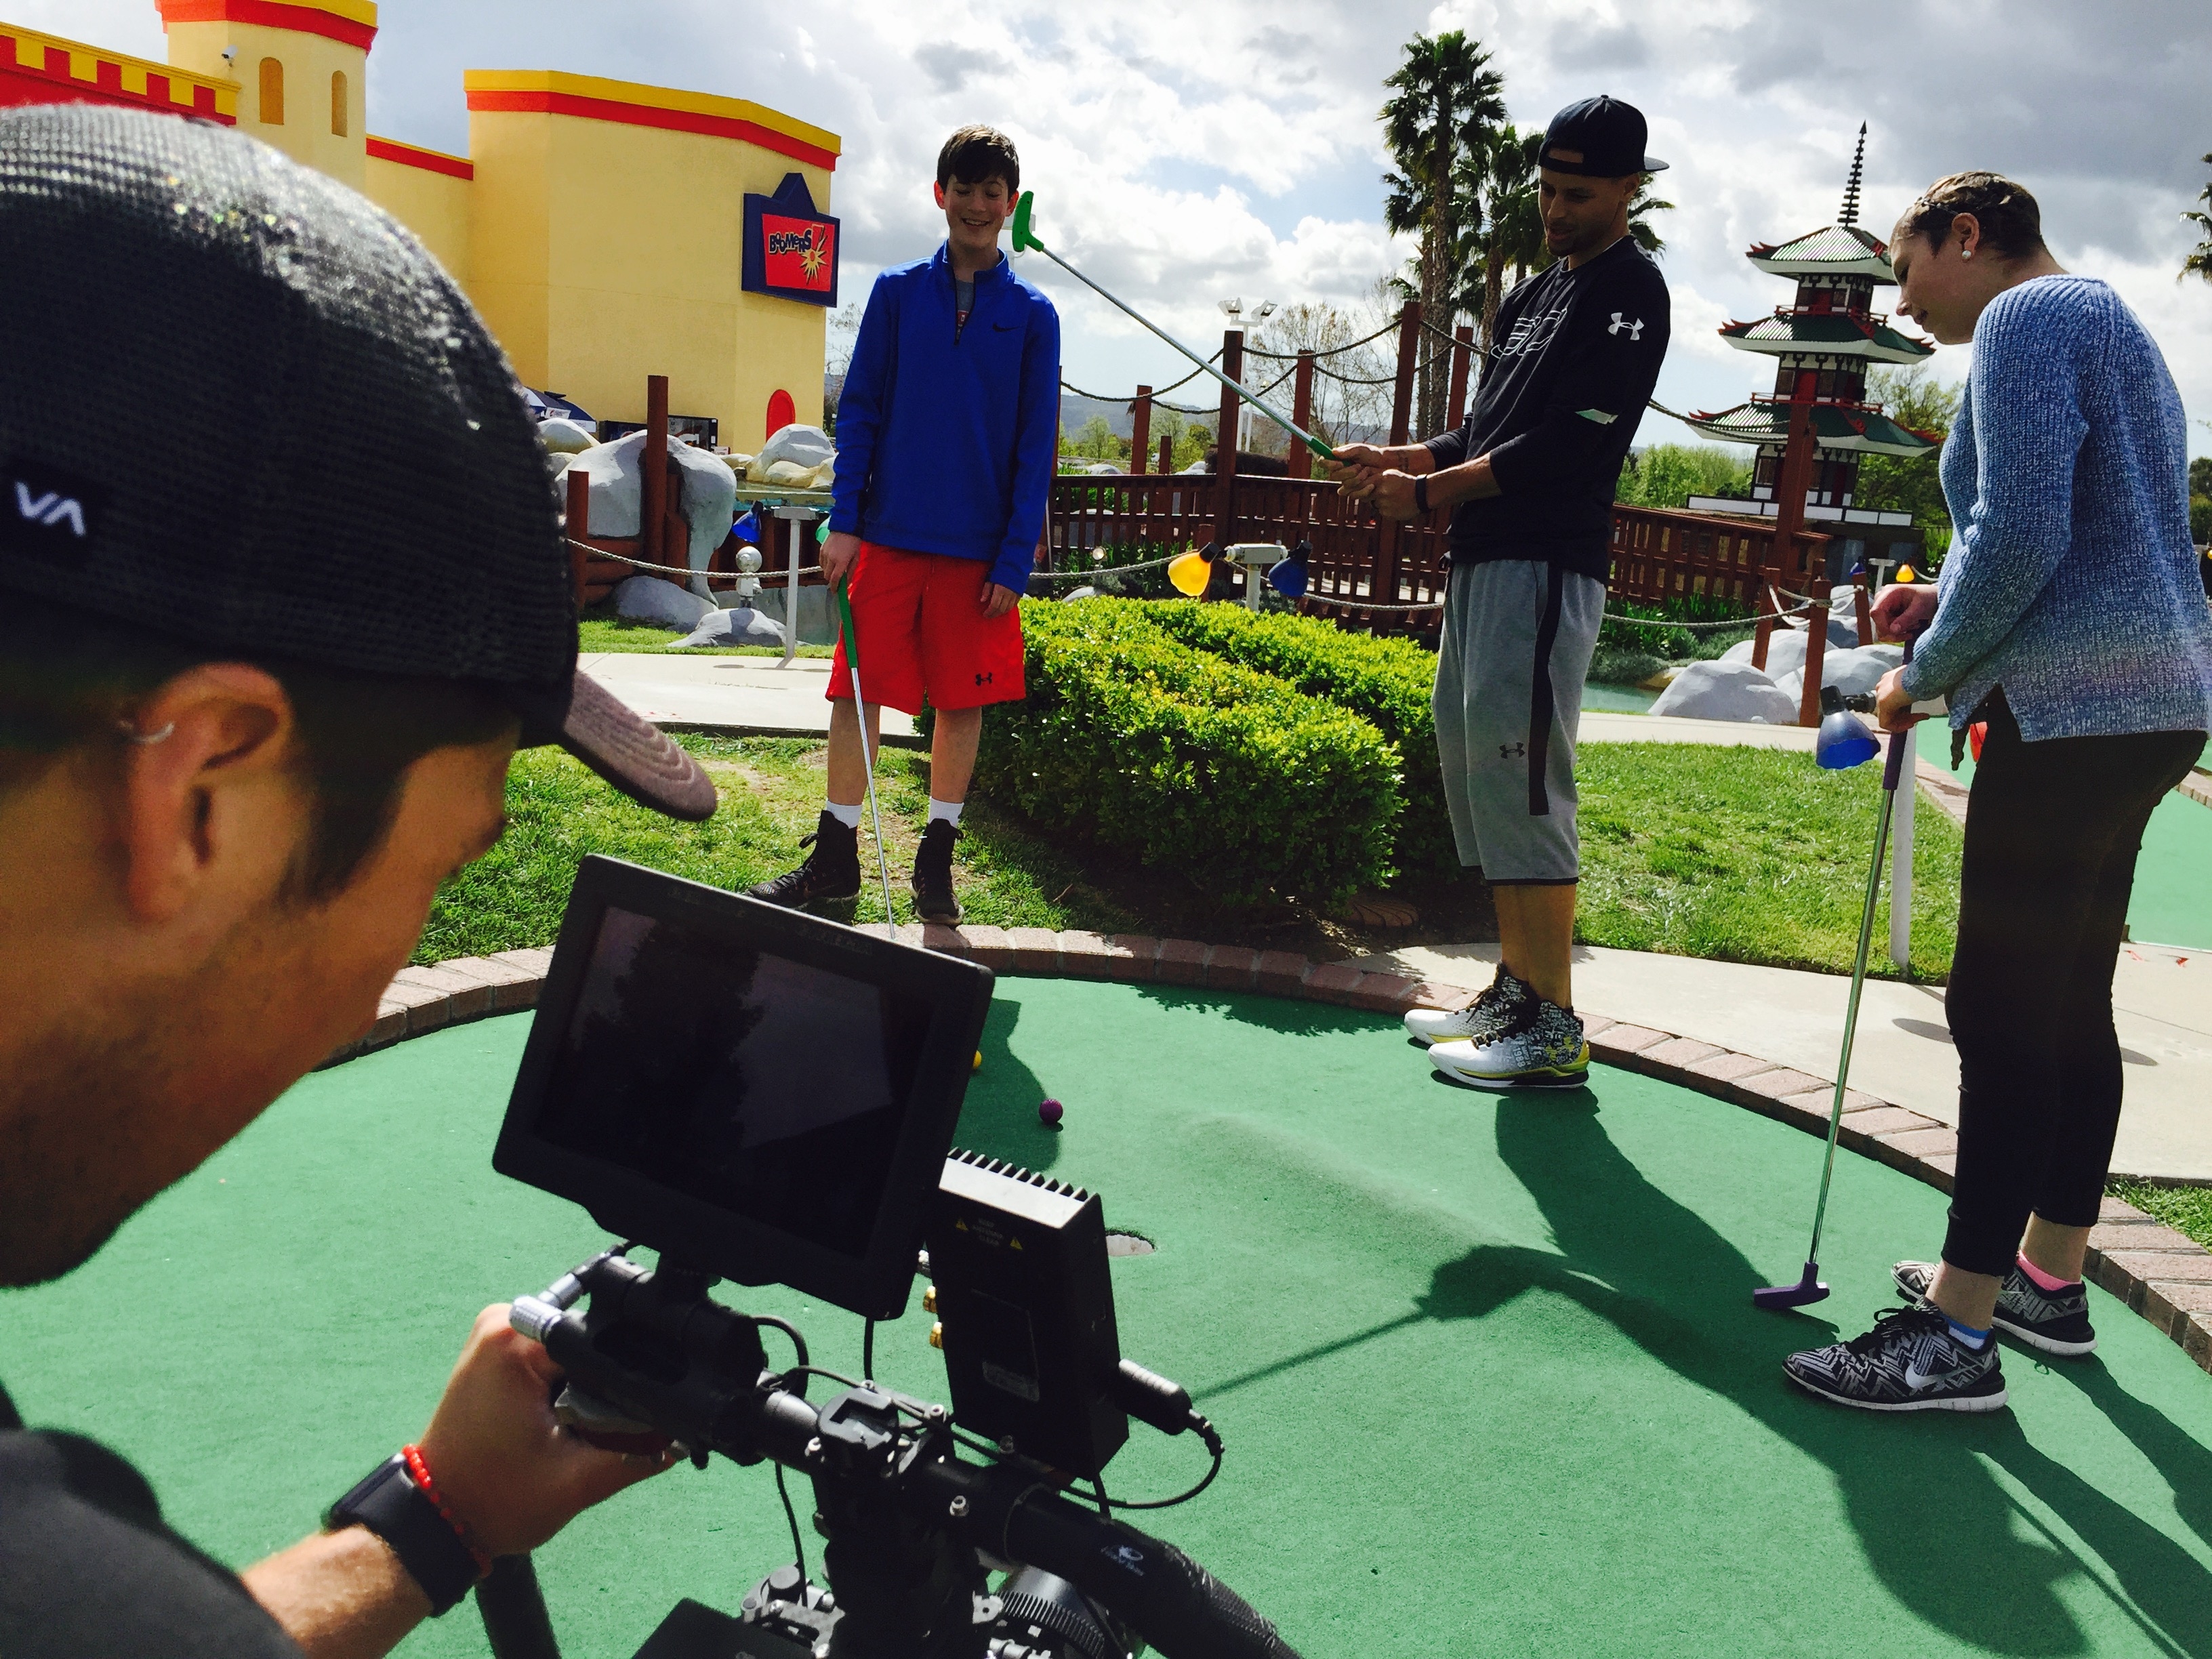 Steph Curry plays miniature golf with ESPN “My Wish” recipient Ashley and her brother Grant. (Michael O’Connor/ESPN)